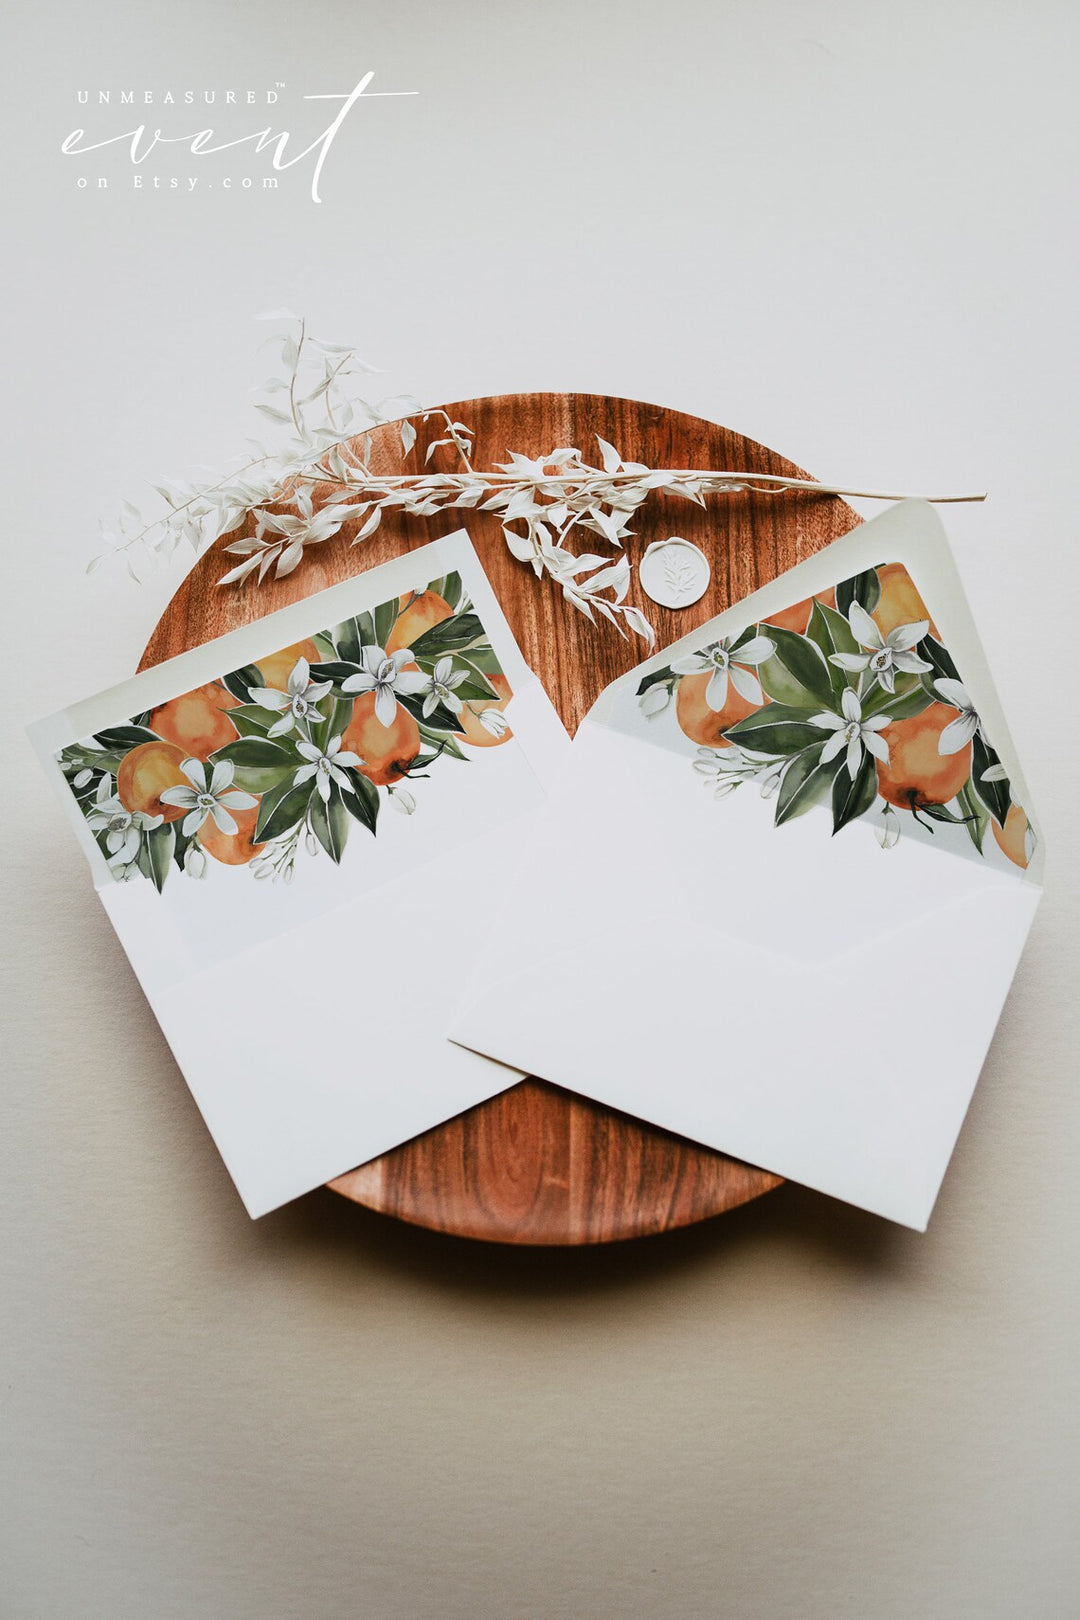 Sending out Wedding Invitations? Why You Need Printed Envelopes- Here are 3 Perfect Styles